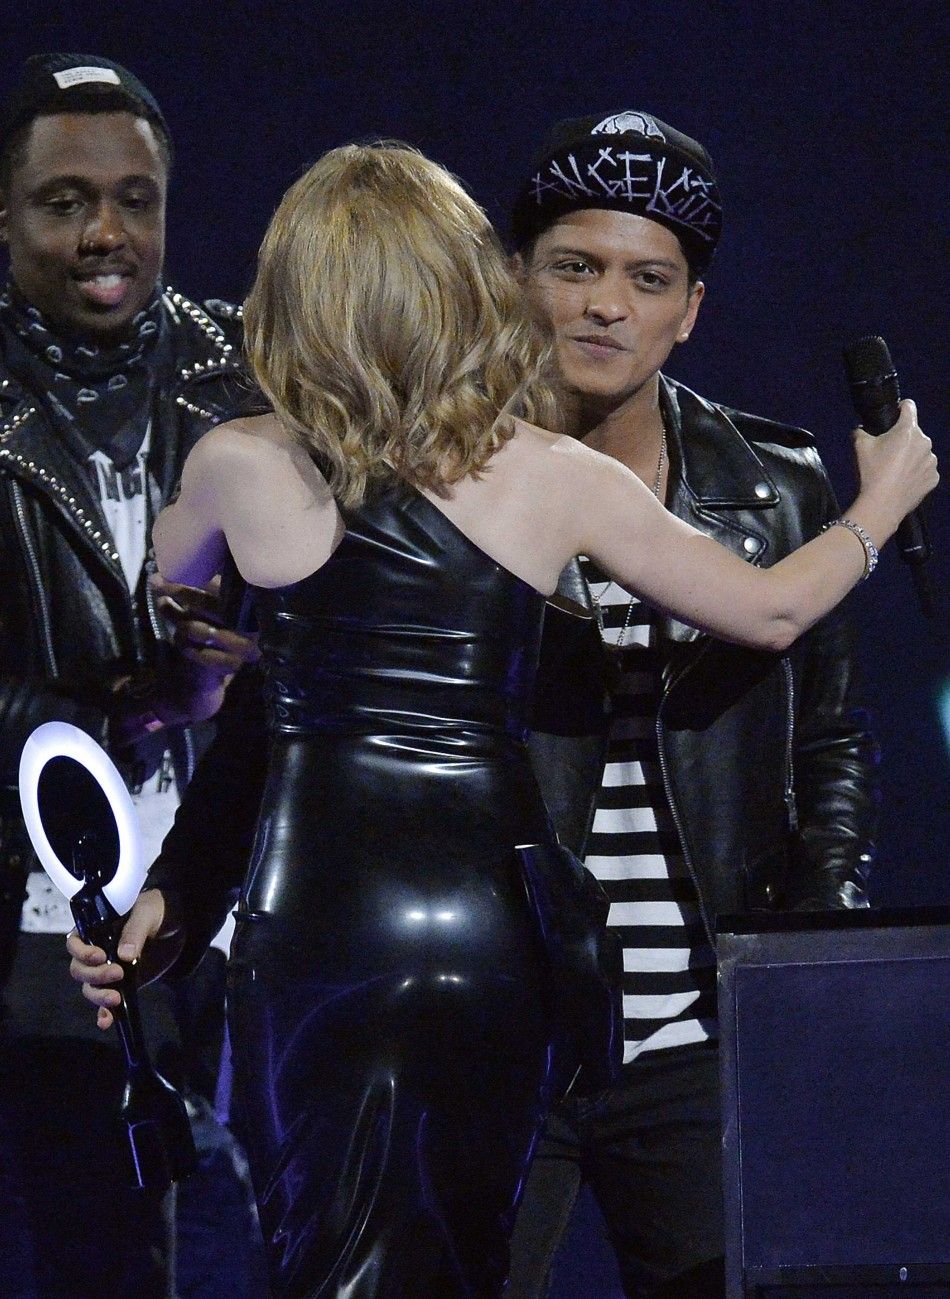 Singer Minogue congratulates Bruno Mars after he won the International Male Solo Artist award at the BRIT Awards, celebrating British pop music, at the O2 Arena in London